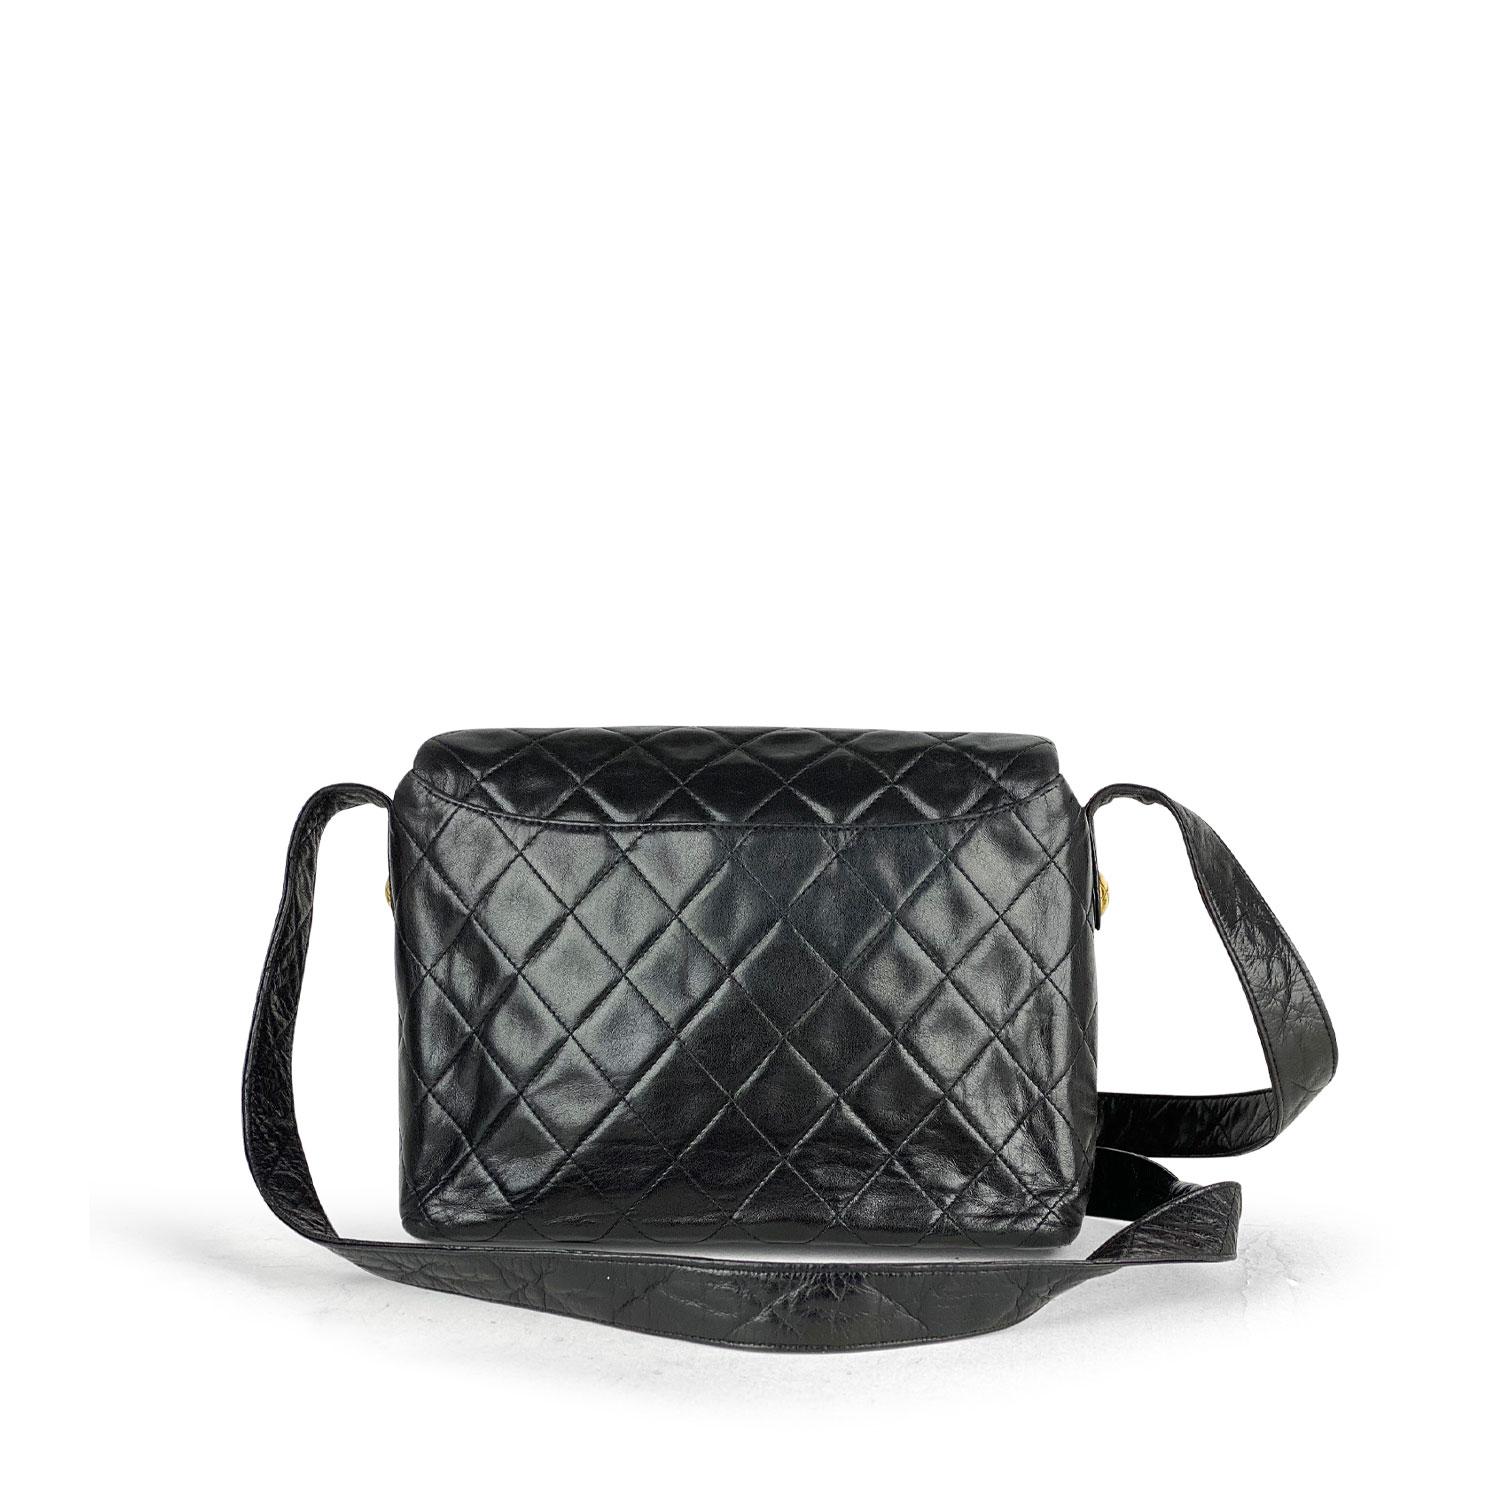 Chanel Black Quilted CC Flap Bag In Good Condition For Sale In Sundbyberg, SE